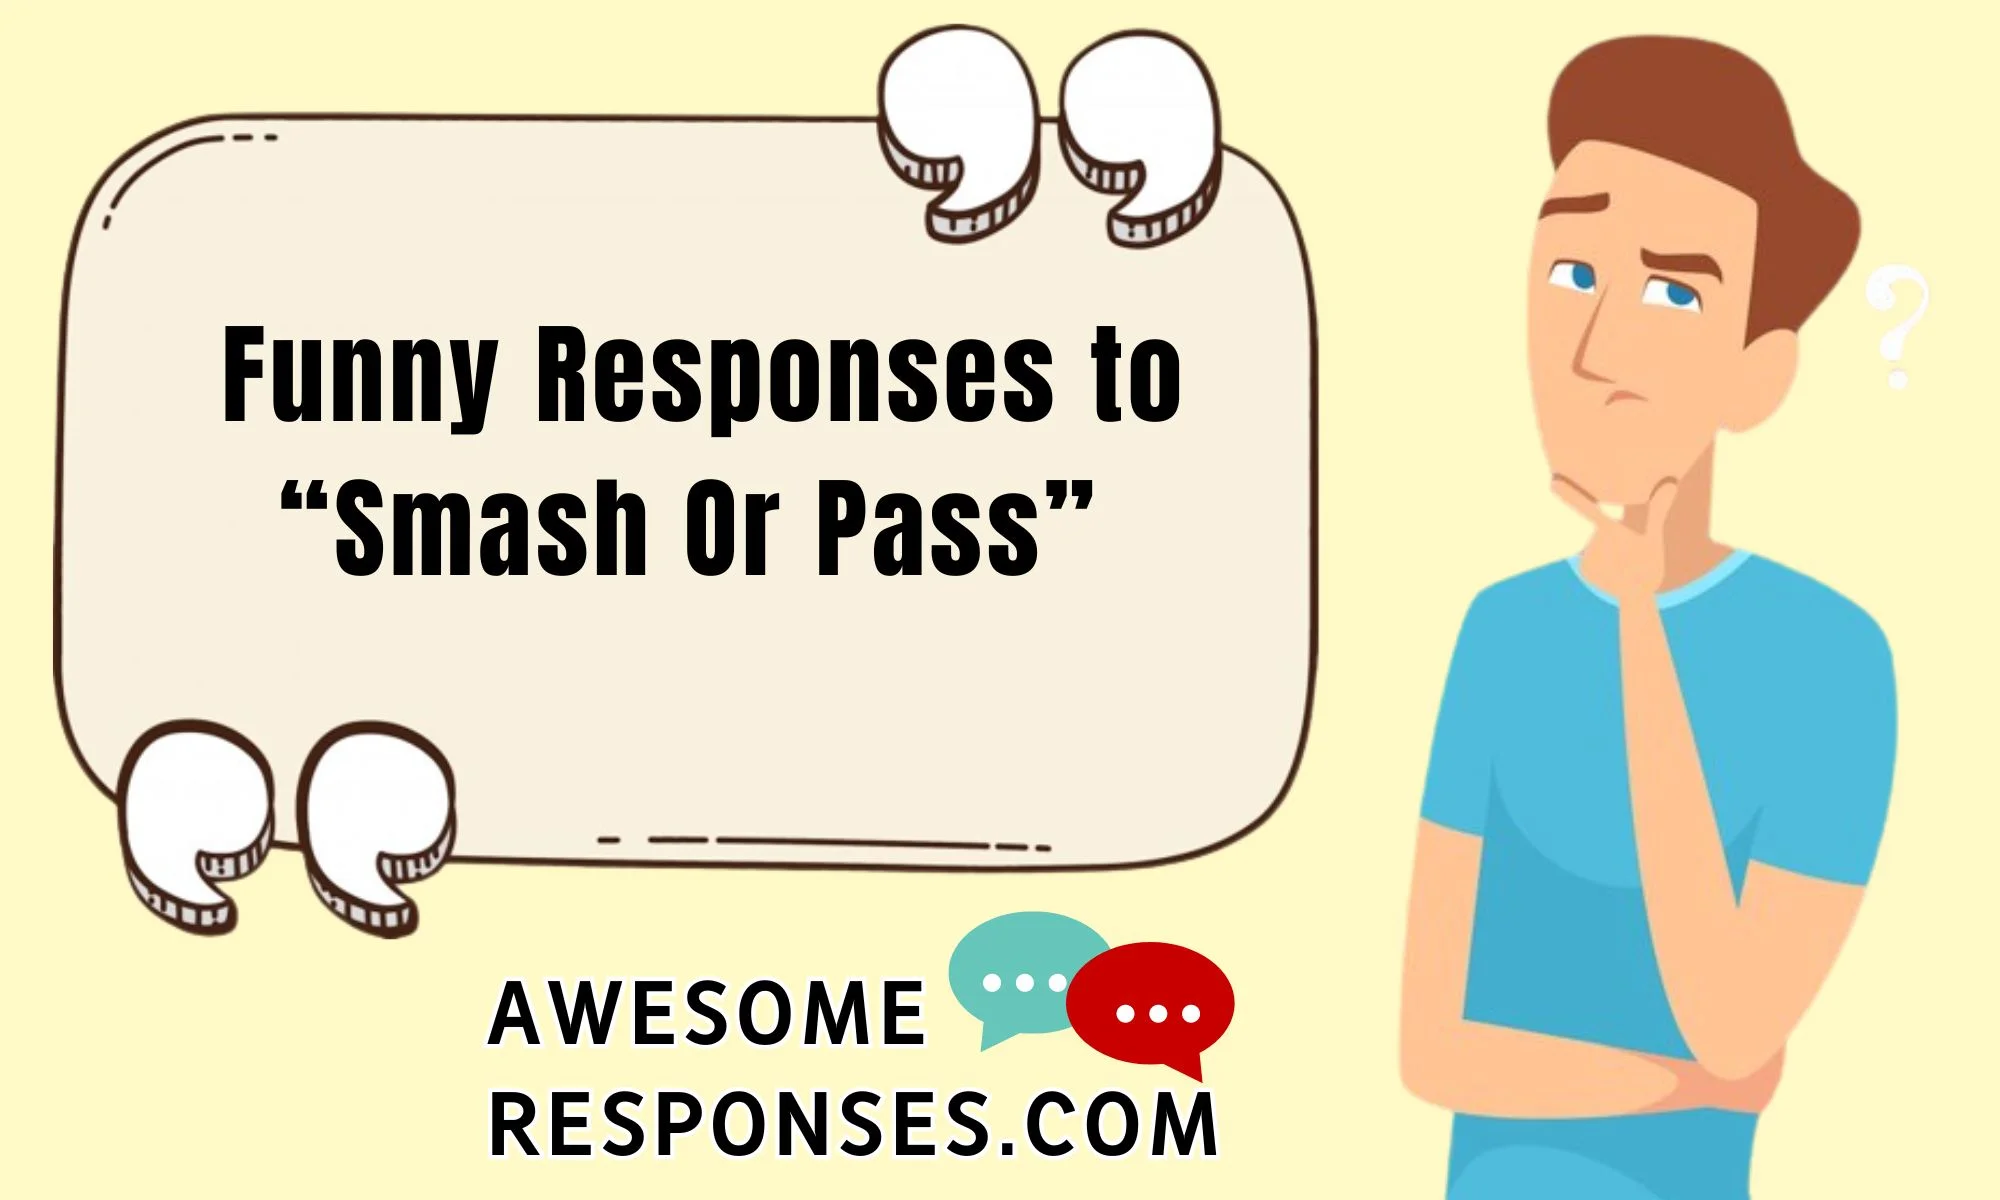 Funny Responses to “Smash Or Pass”